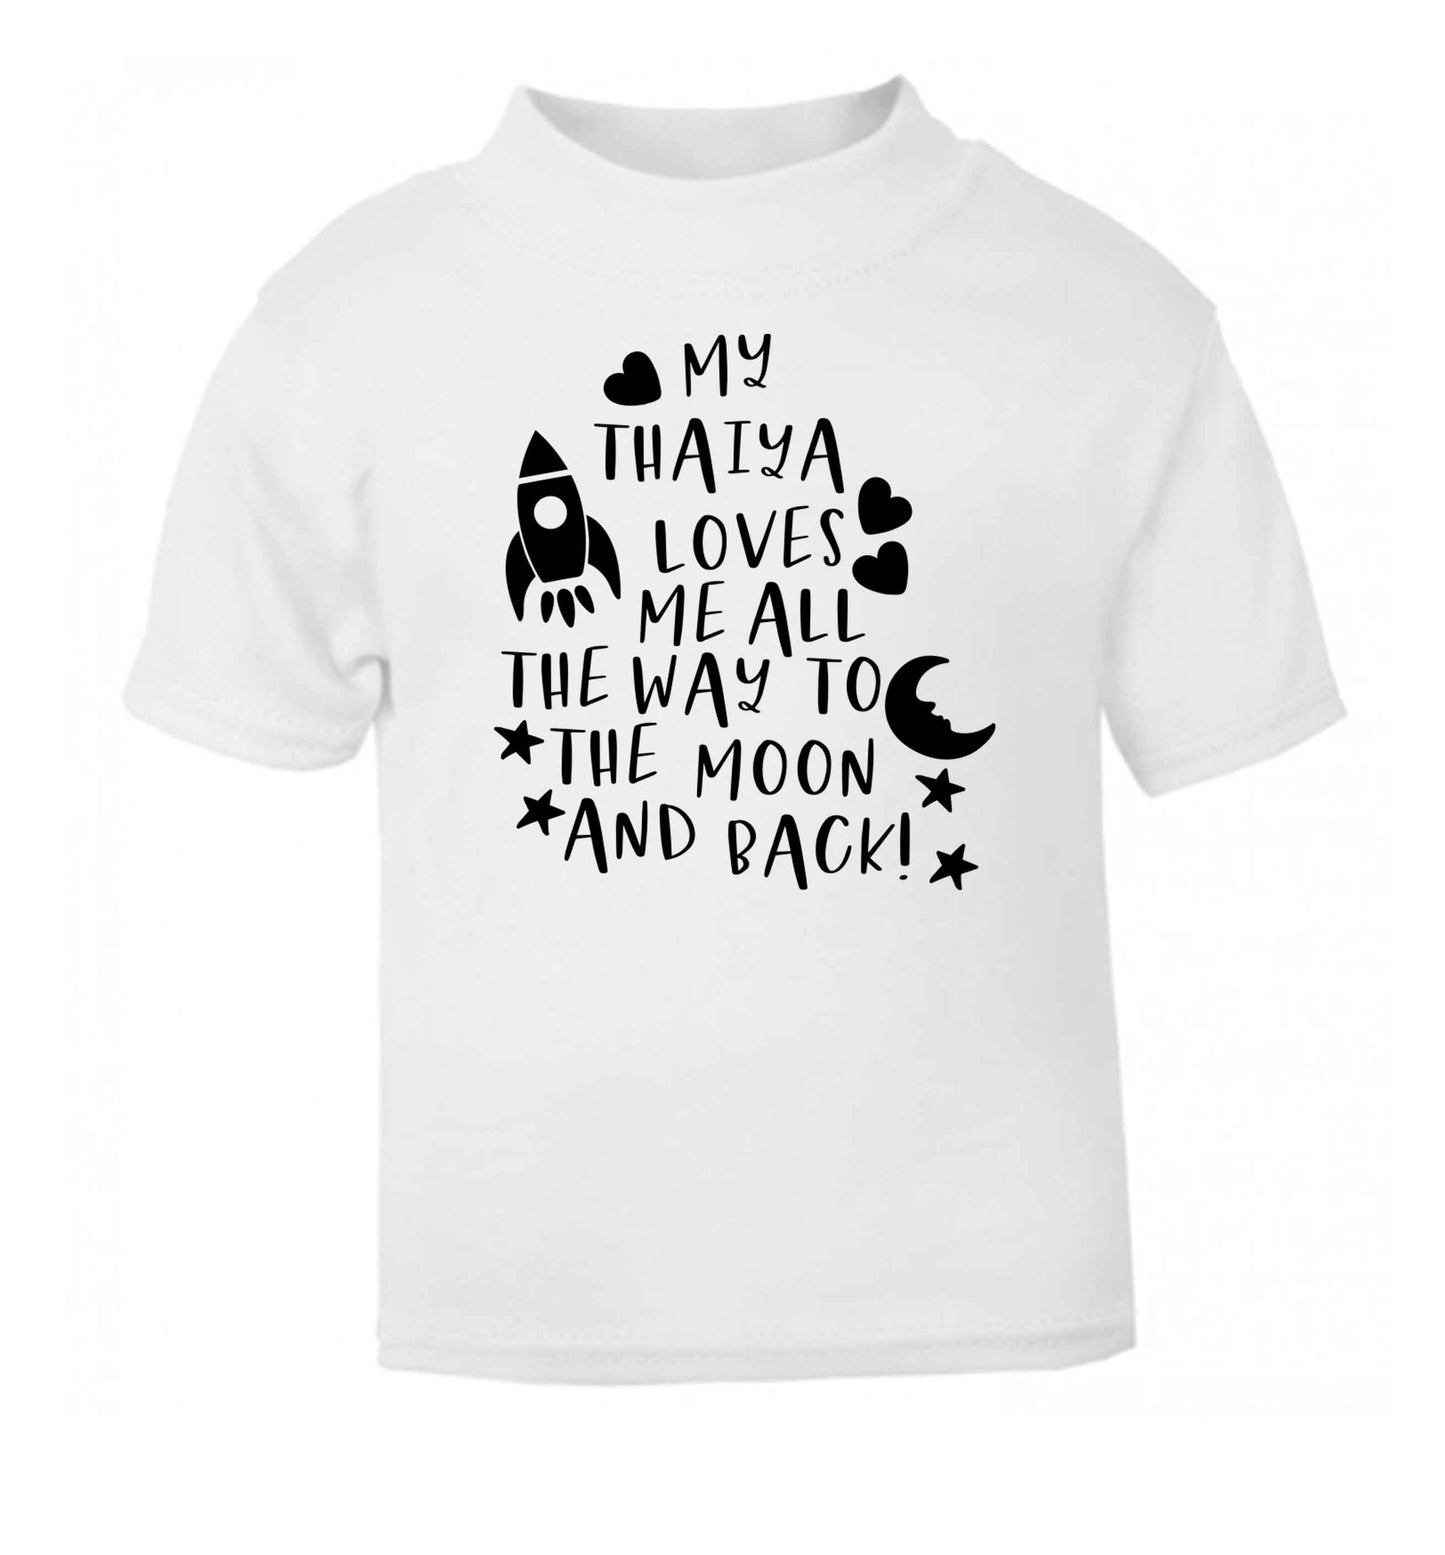 My thaiya loves me all the way to the moon and back white Baby Toddler Tshirt 2 Years